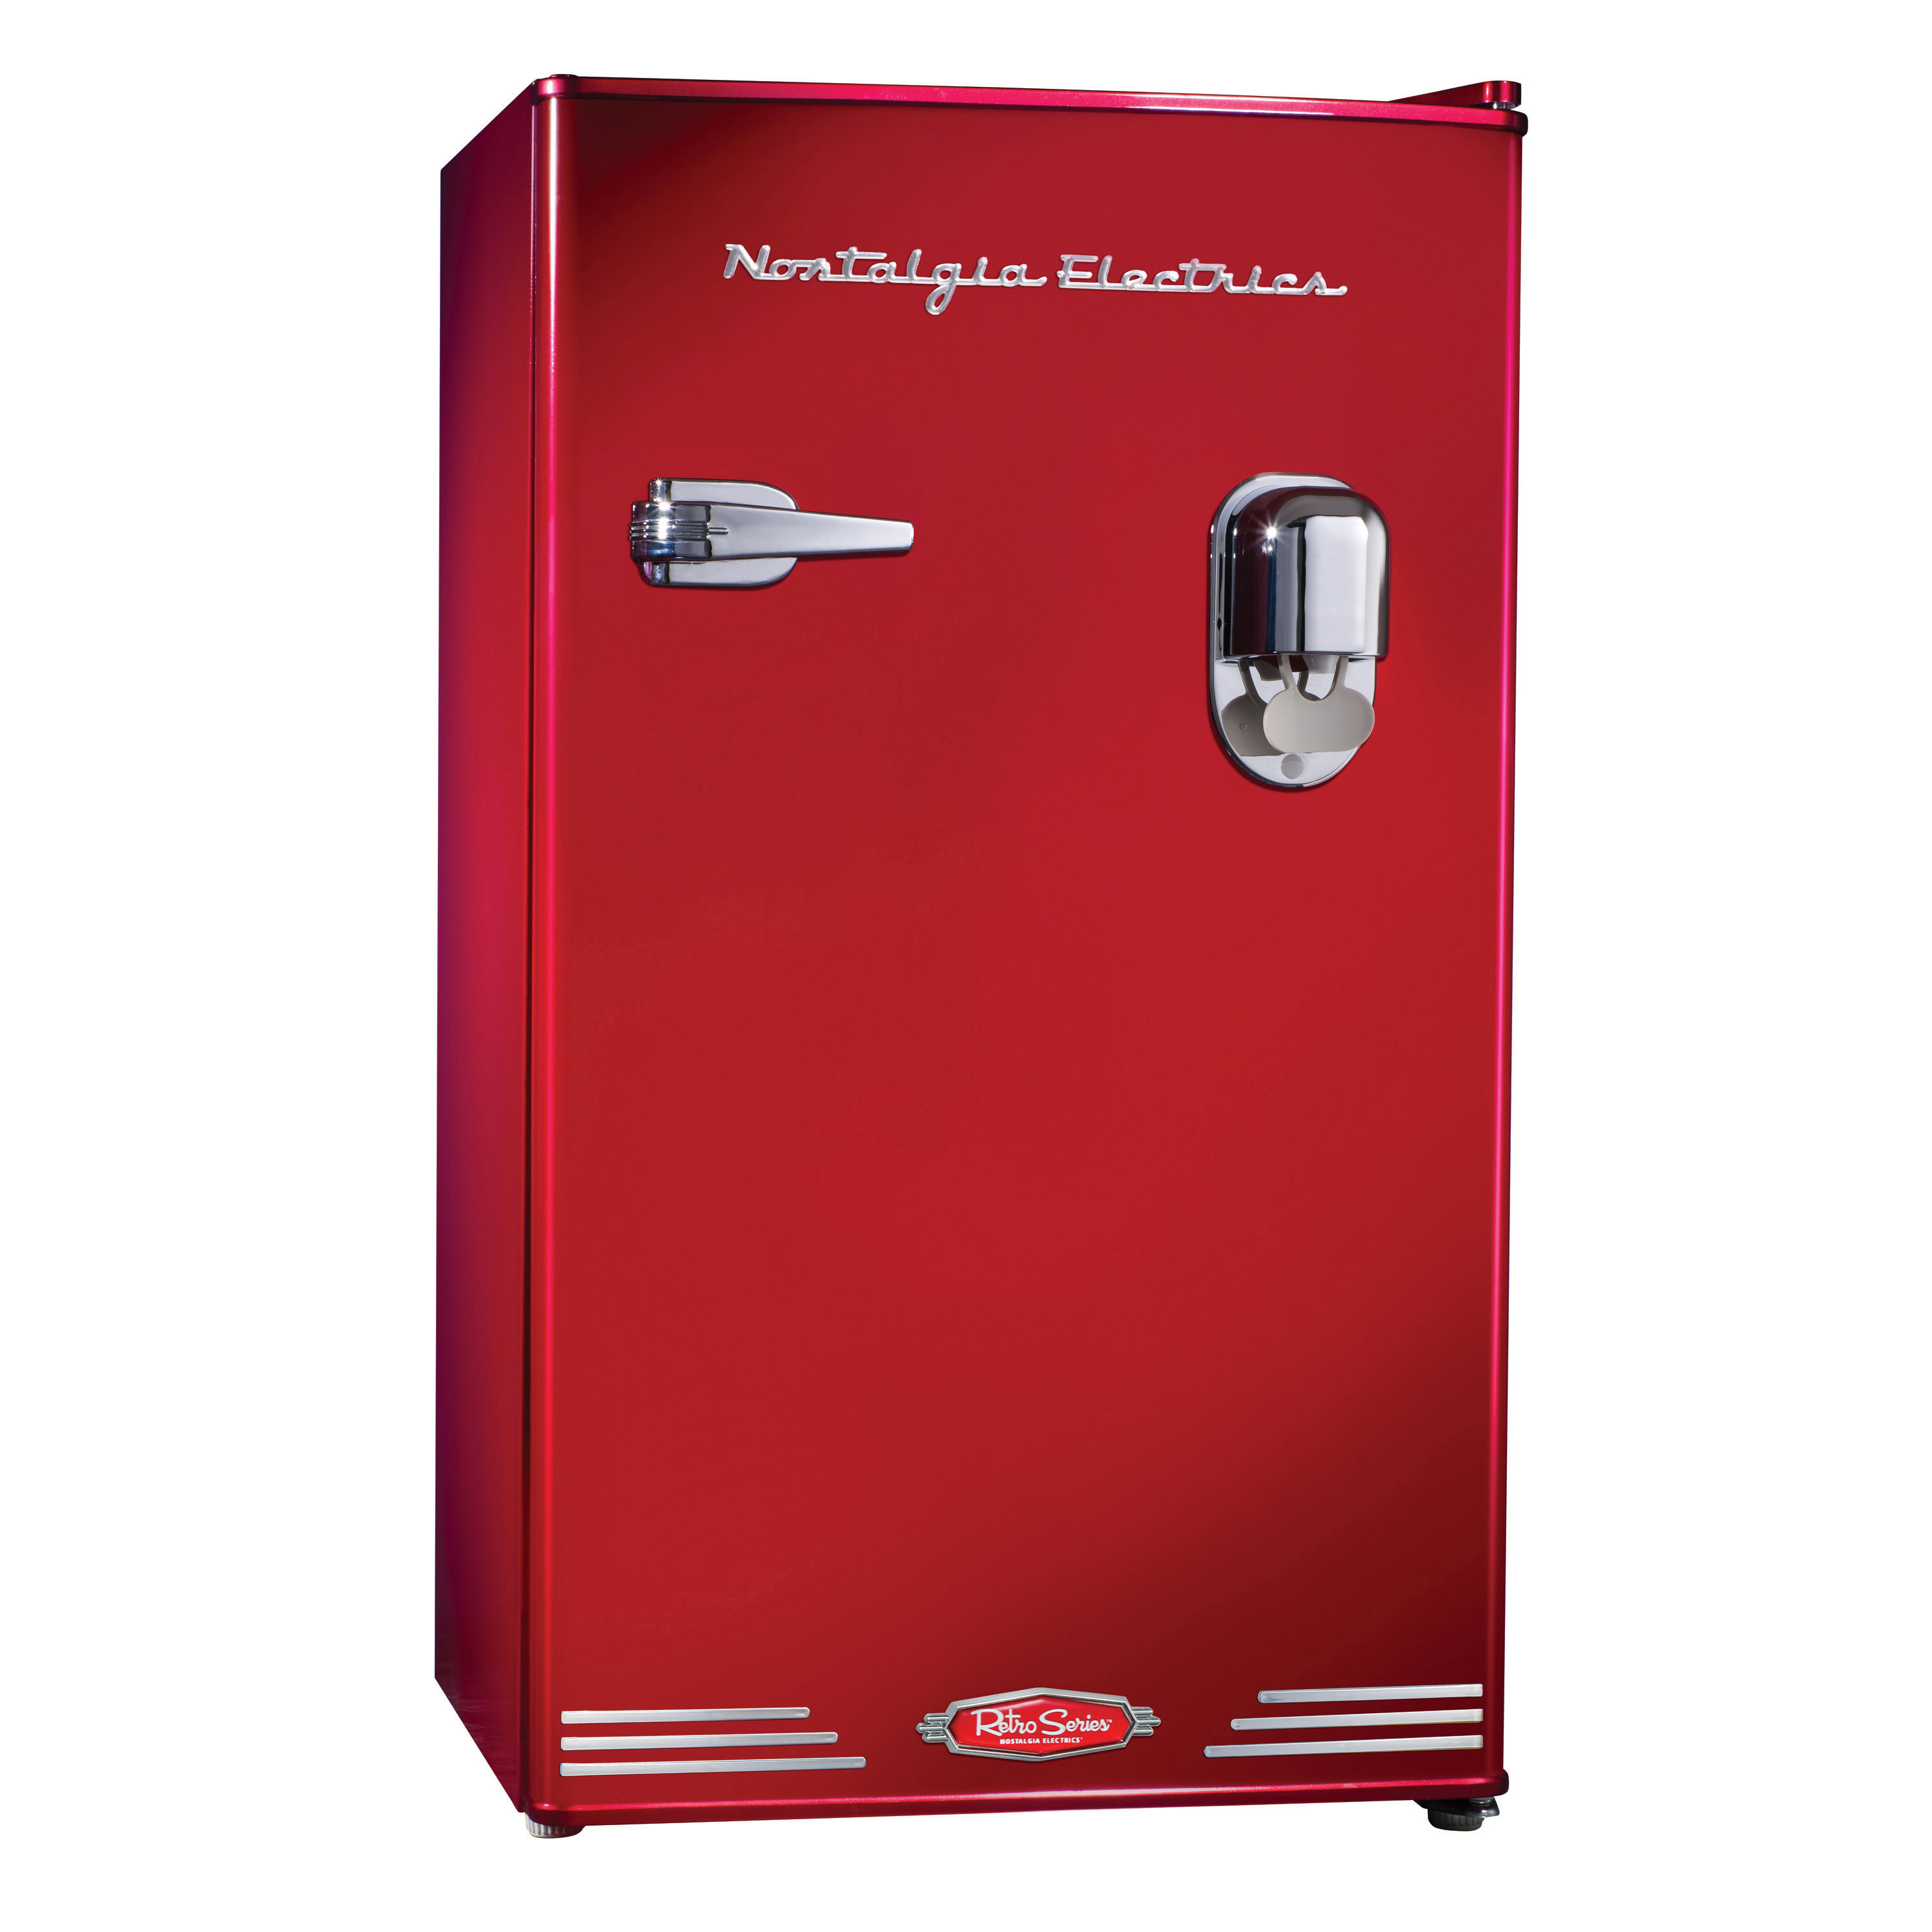 Nostalgia Electrics RRF300DNCRED Retro Series 3.0Cubic Foot Compact Refrigerator with Dispenser